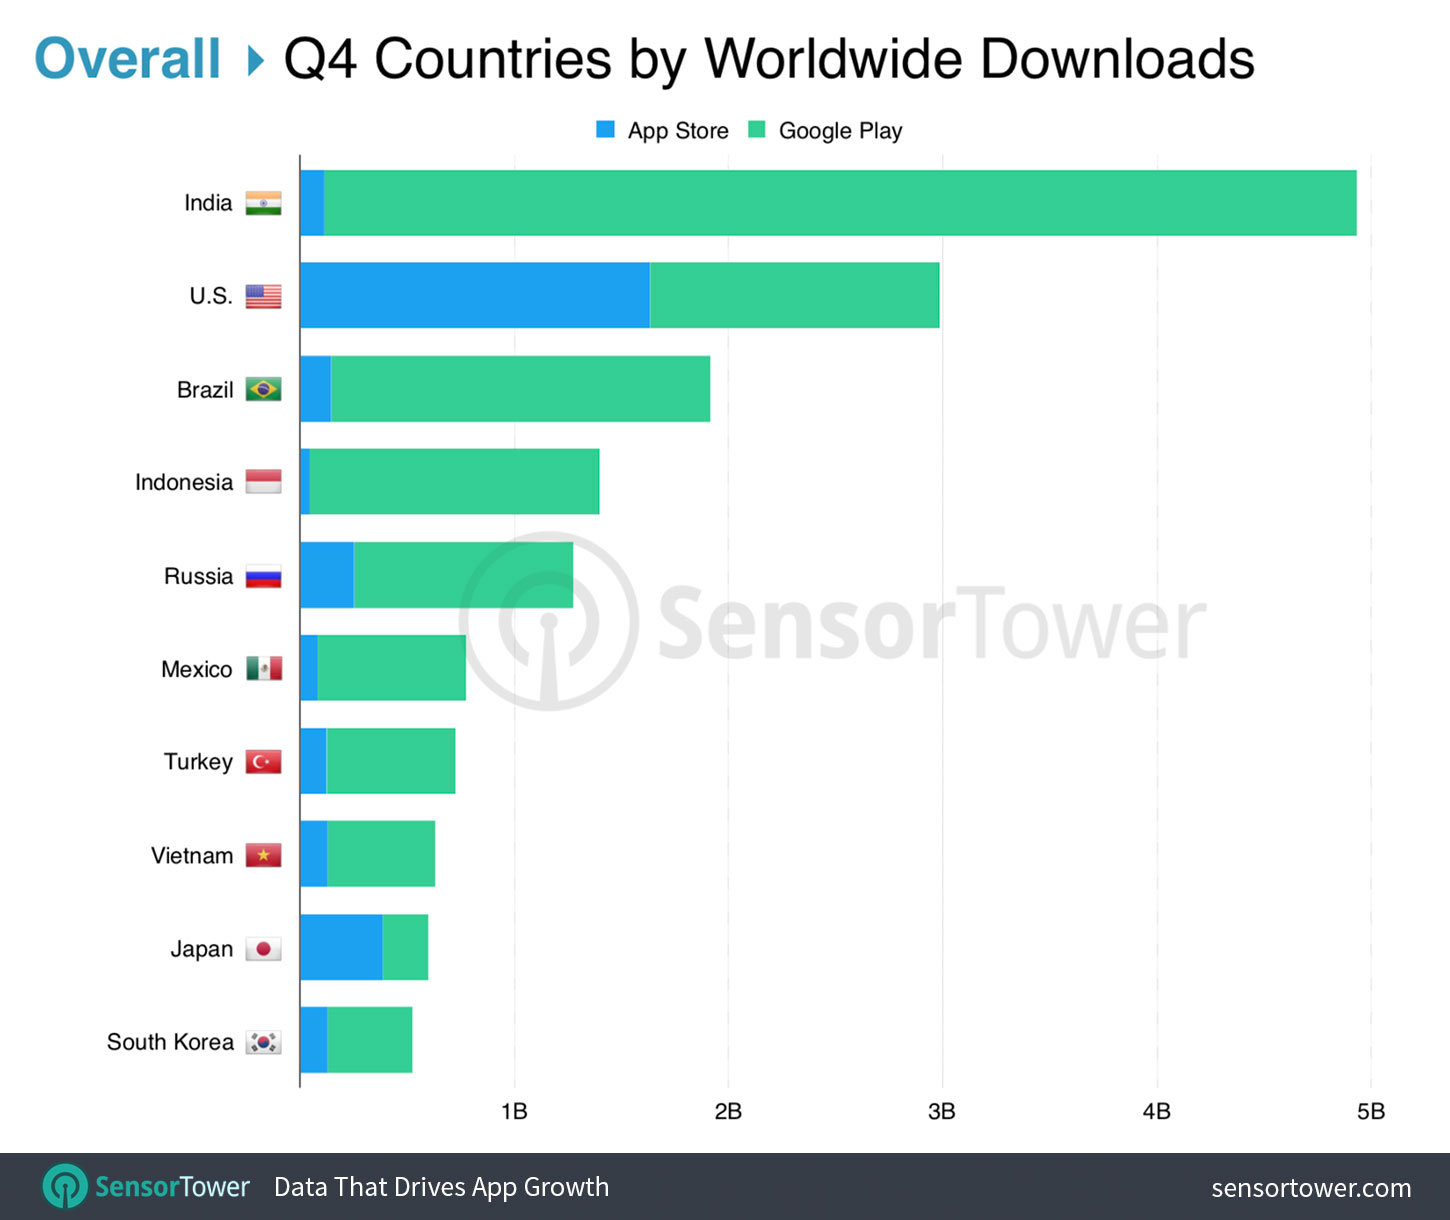 Top Countries by Worldwide Downloads Overall for Q4 2018